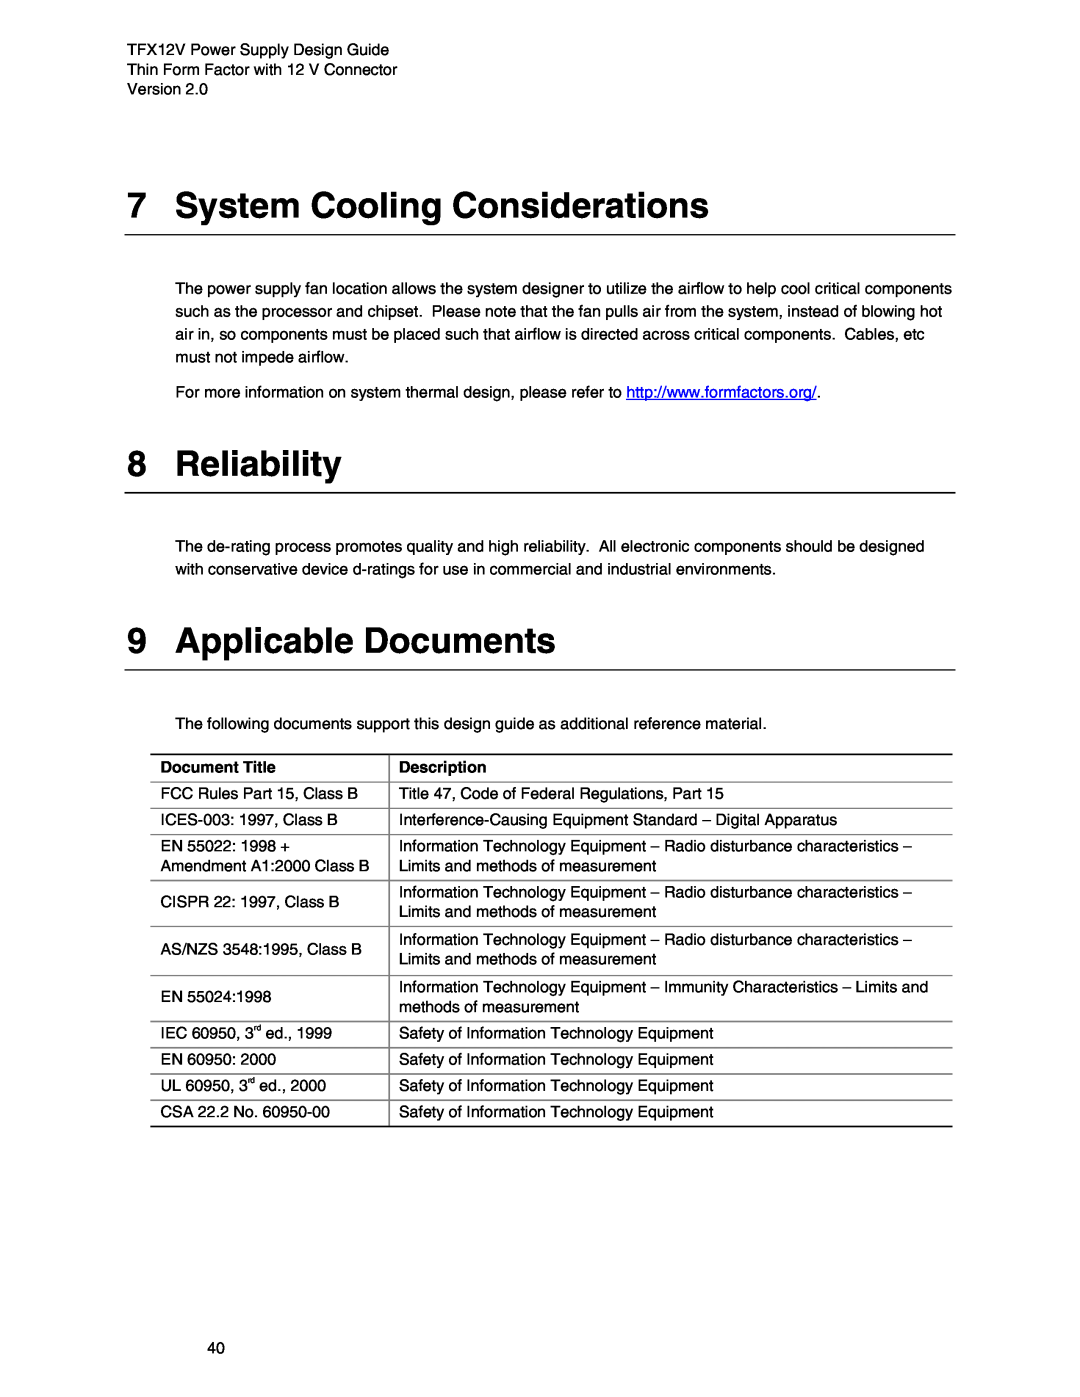 Intel TFX12V manual System Cooling Considerations, Reliability, Applicable Documents, Document Title, Description 